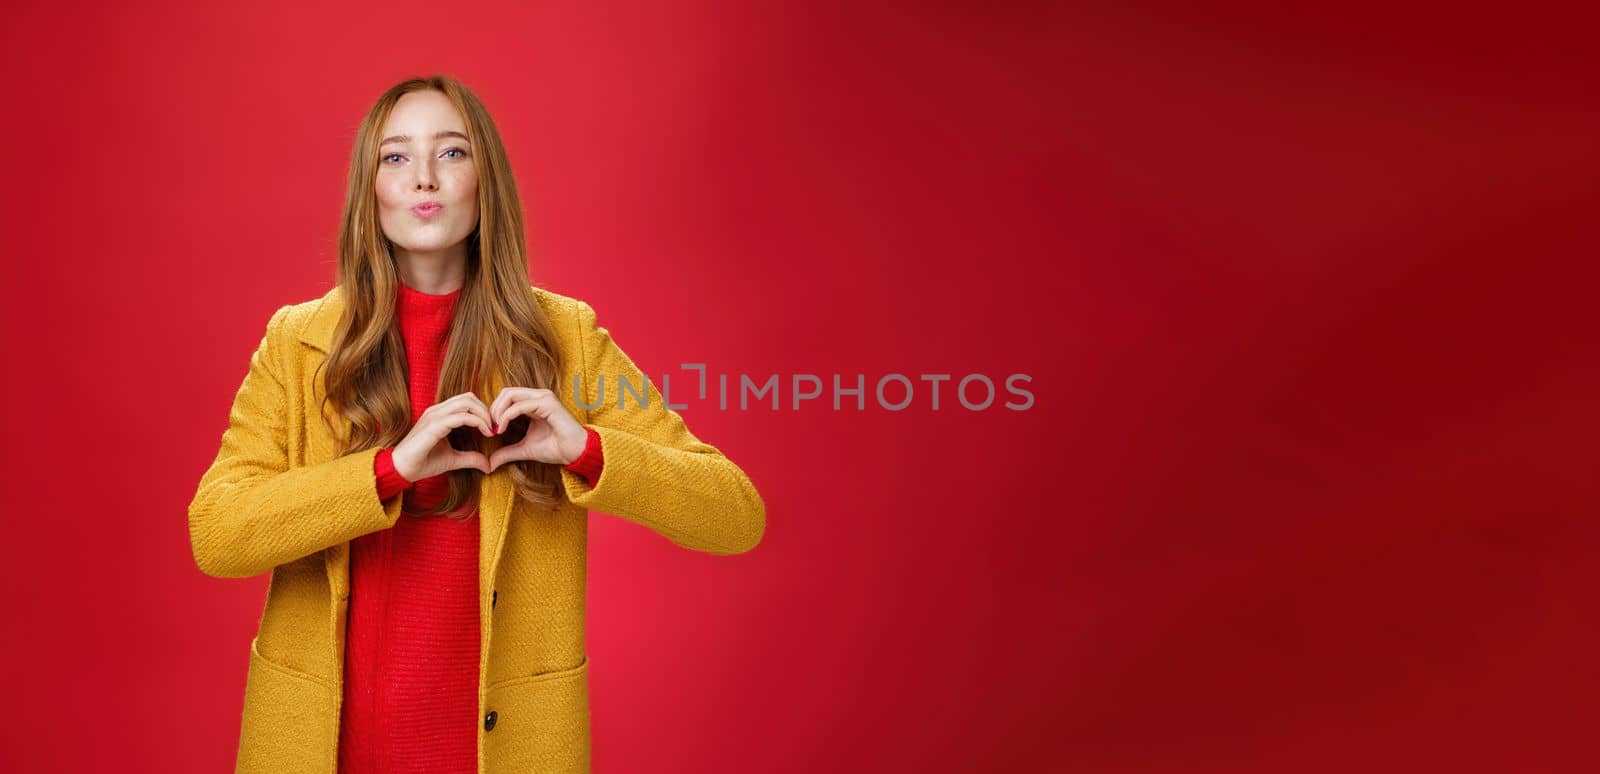 Love you all. Portrait of romantic and stylish good-looking flirty redhead female with freckles and blue eyes folding lips to give kiss showing heart gesture, confessing in sympathy over red wall.